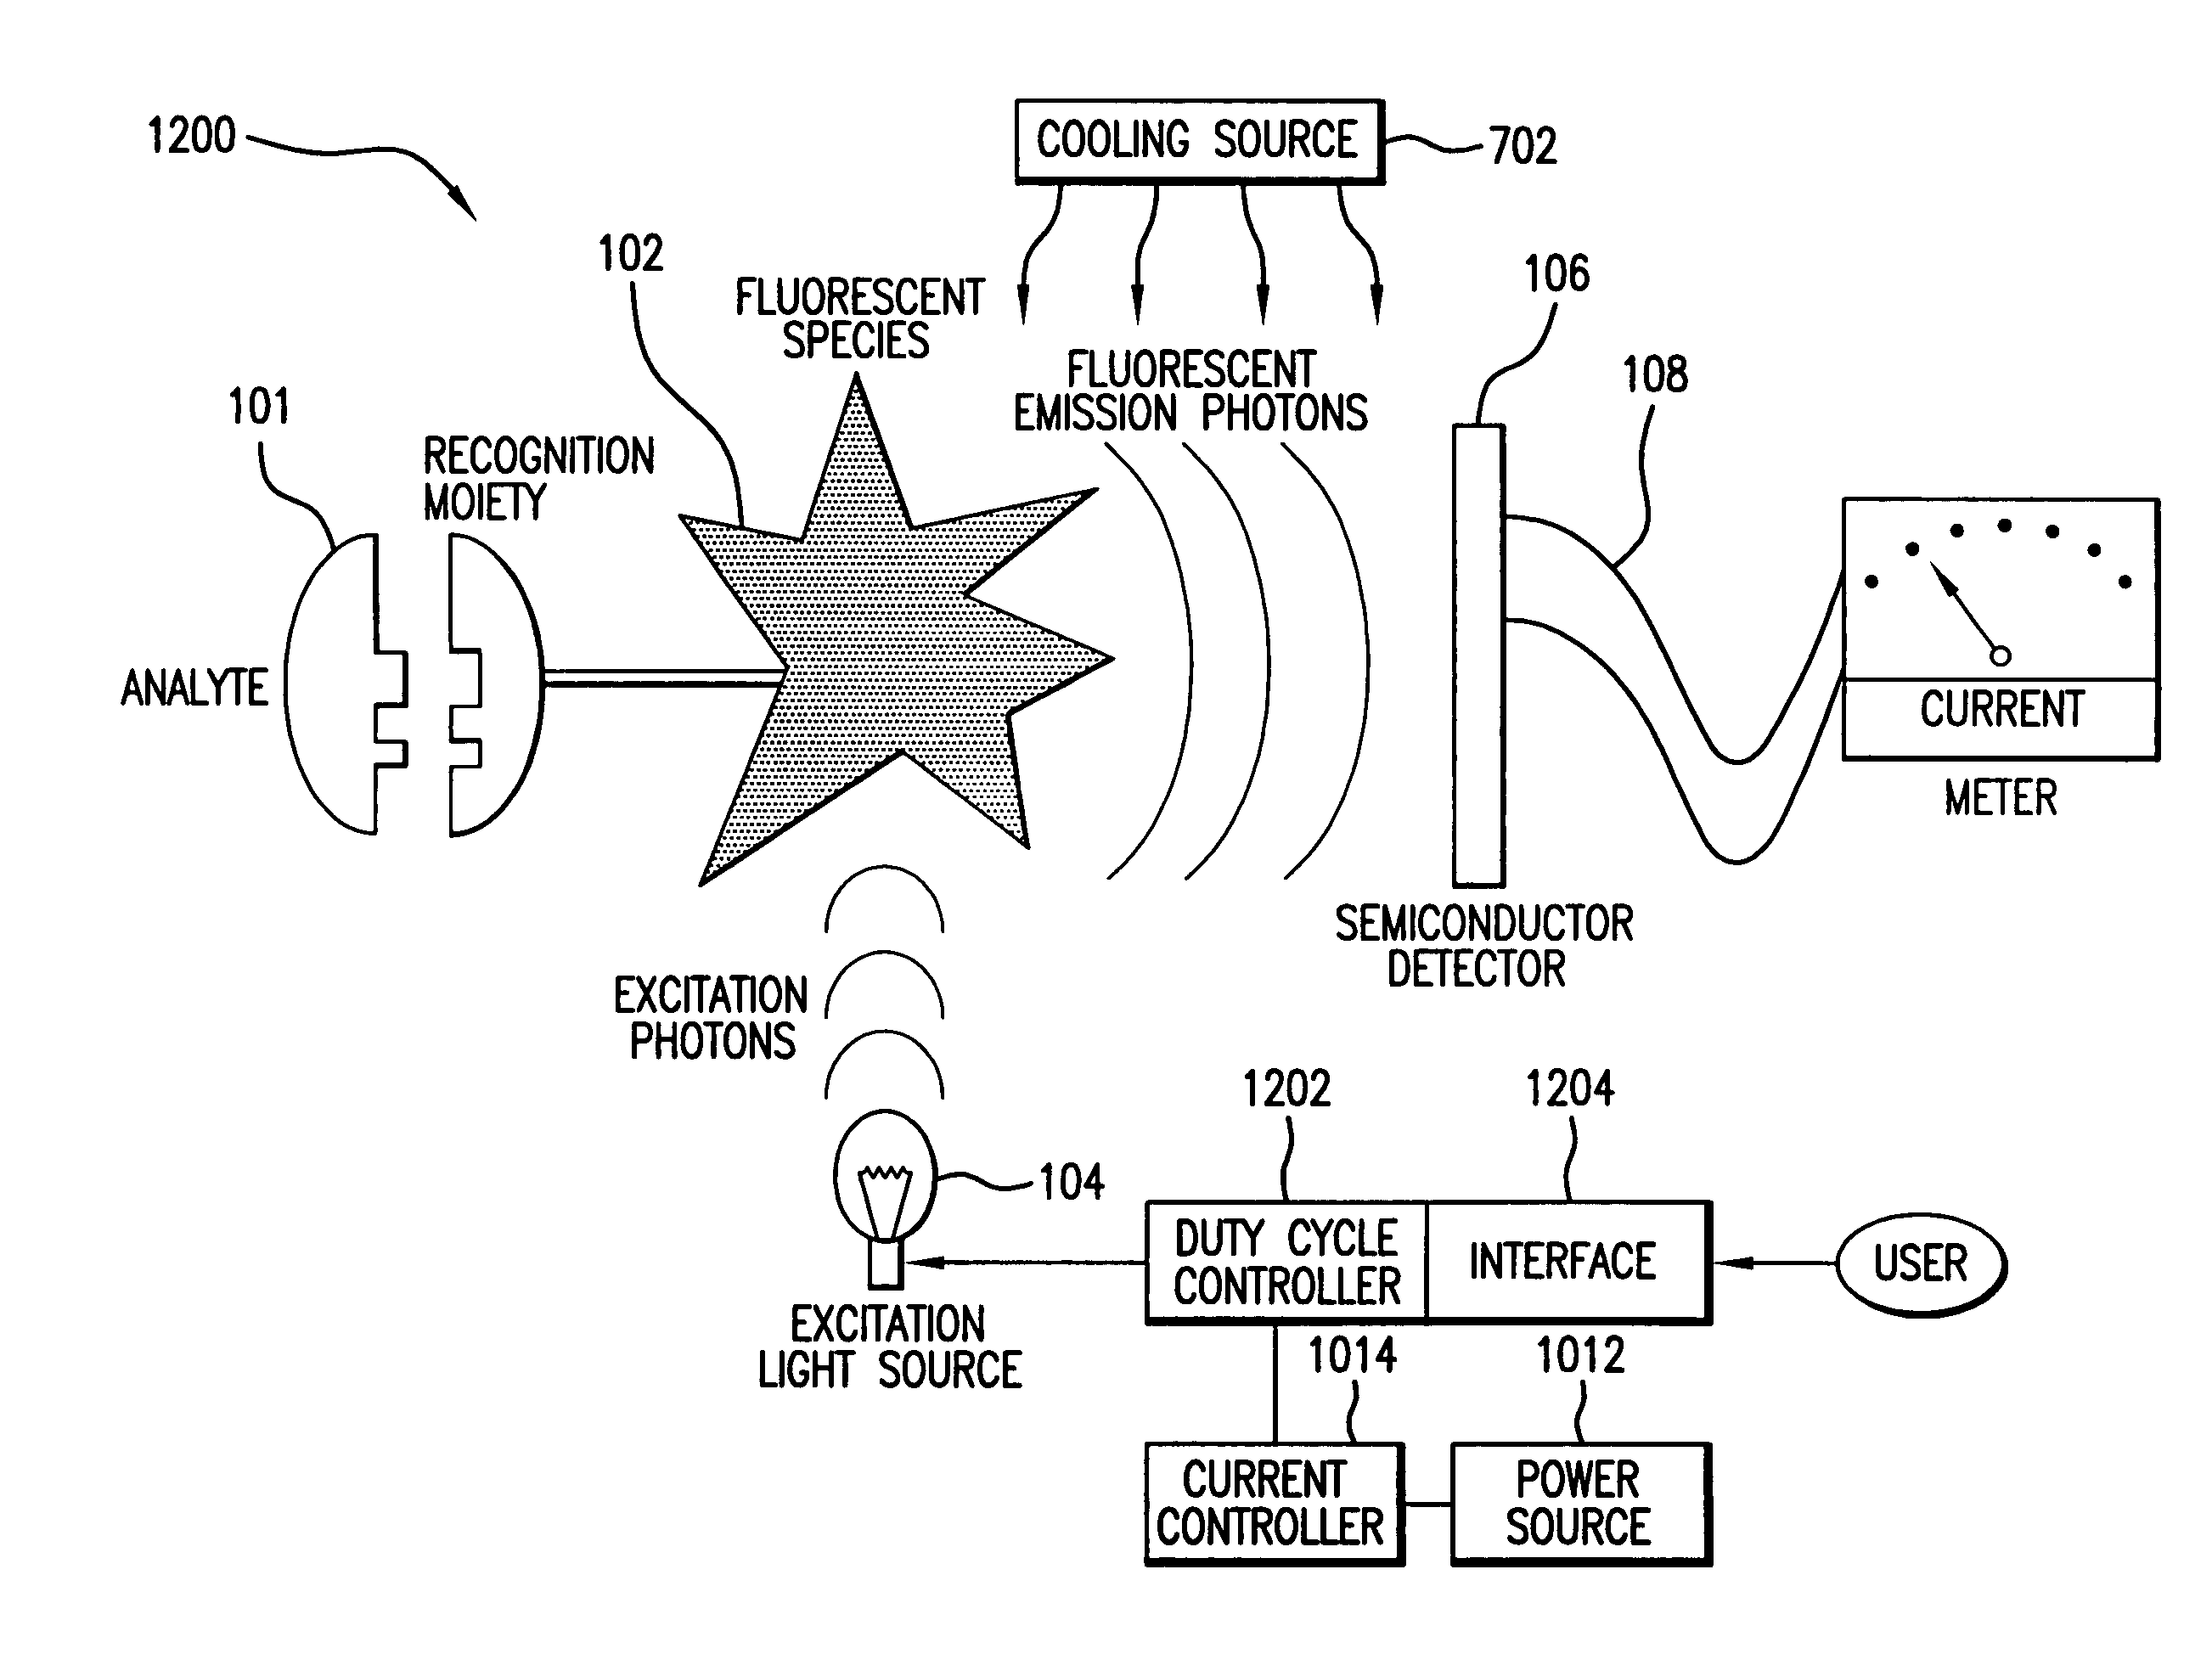 Systems and methods for extending the useful life of optical sensors